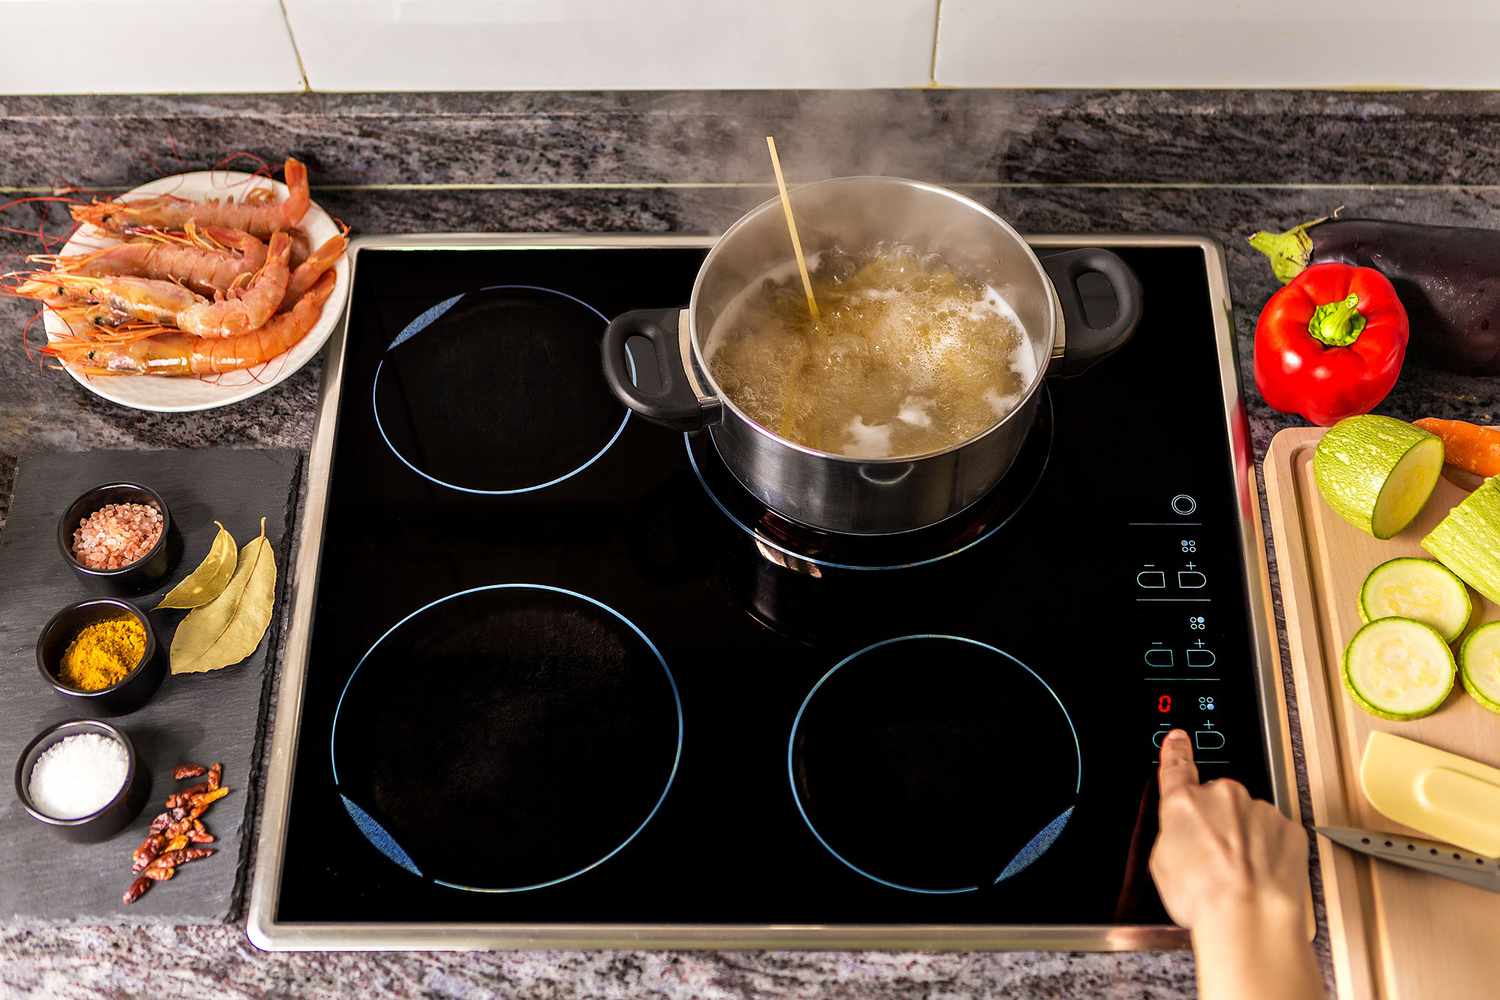 How Does An Induction Cooktop Work